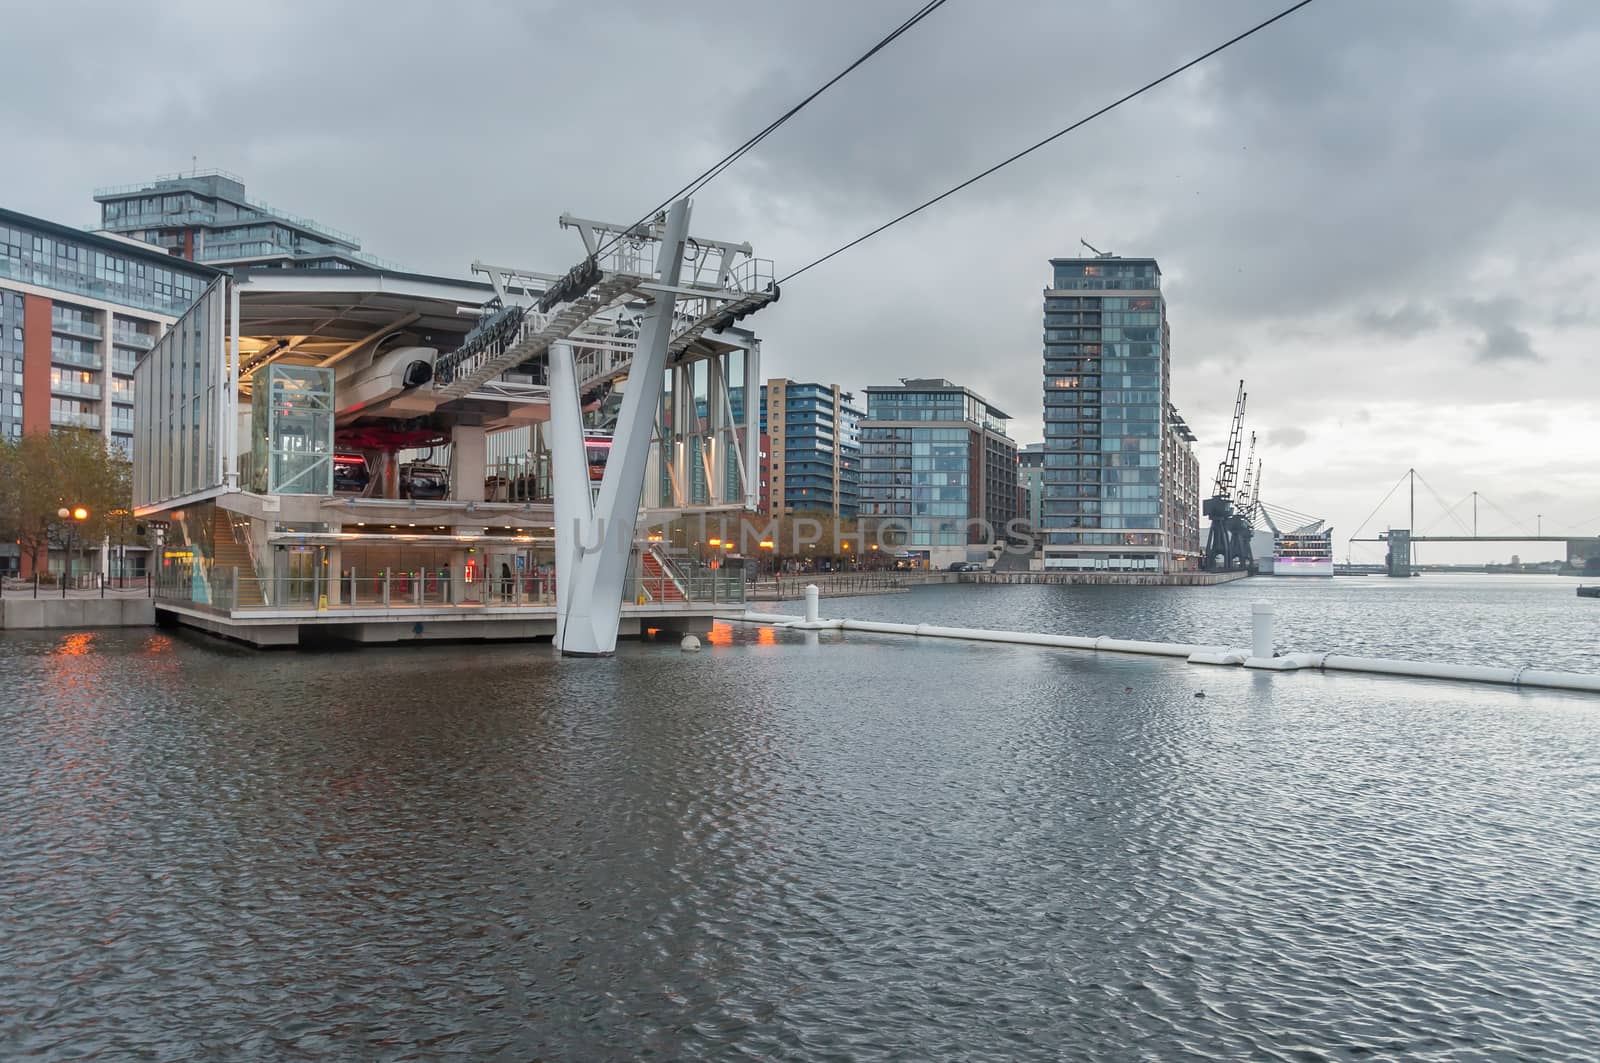 LONDON, UNITED KINGDOM - NOVEMBER 8, 2014: Royal Victoria Docks cable car station on a rainy day. Emirates Air Line is a ten minute gondola lift link across the River Thames.